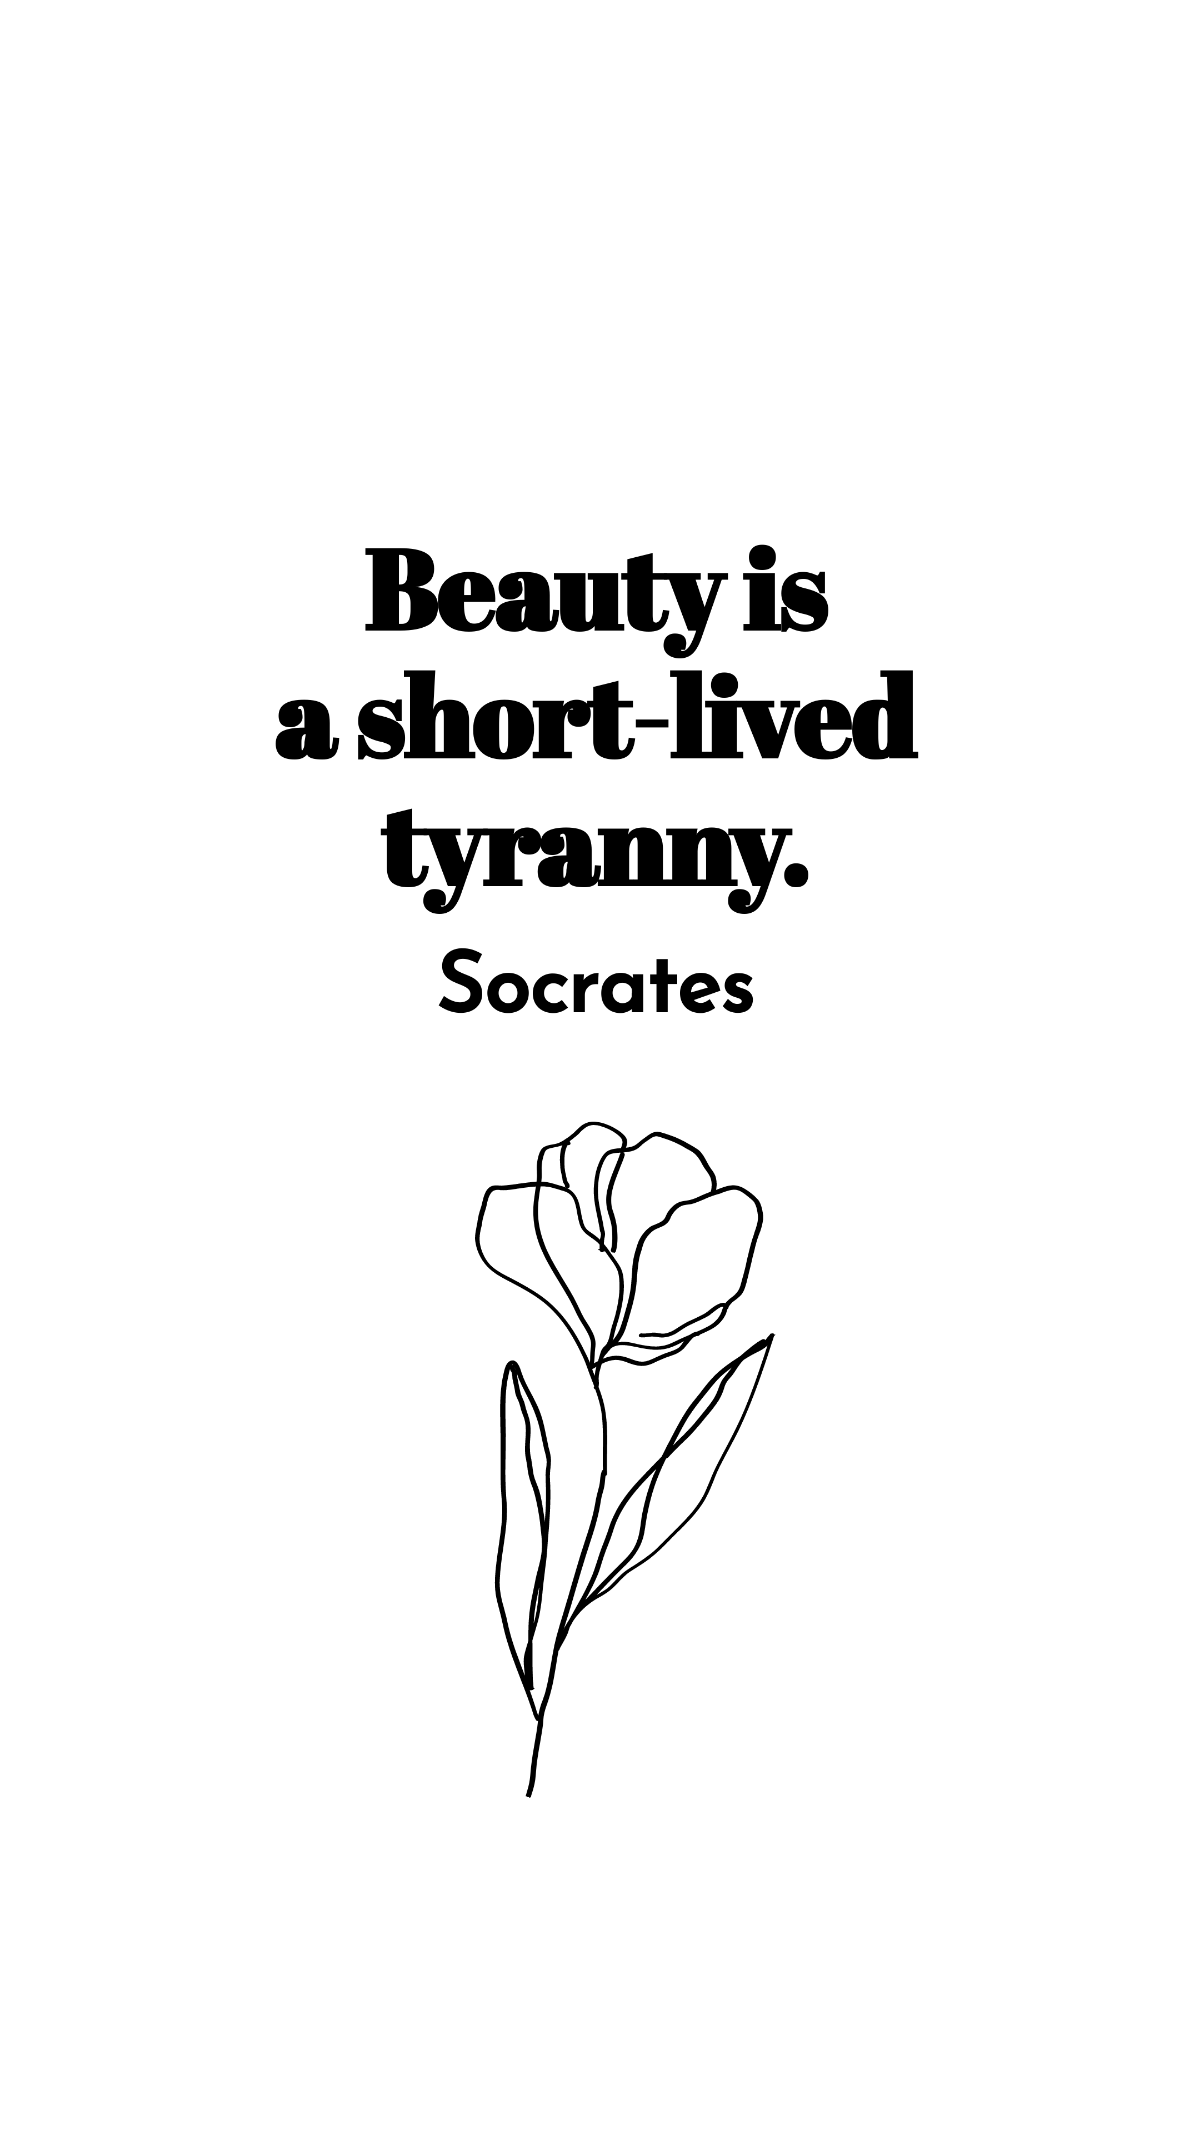 Socrates - Beauty is a short-lived tyranny. Template